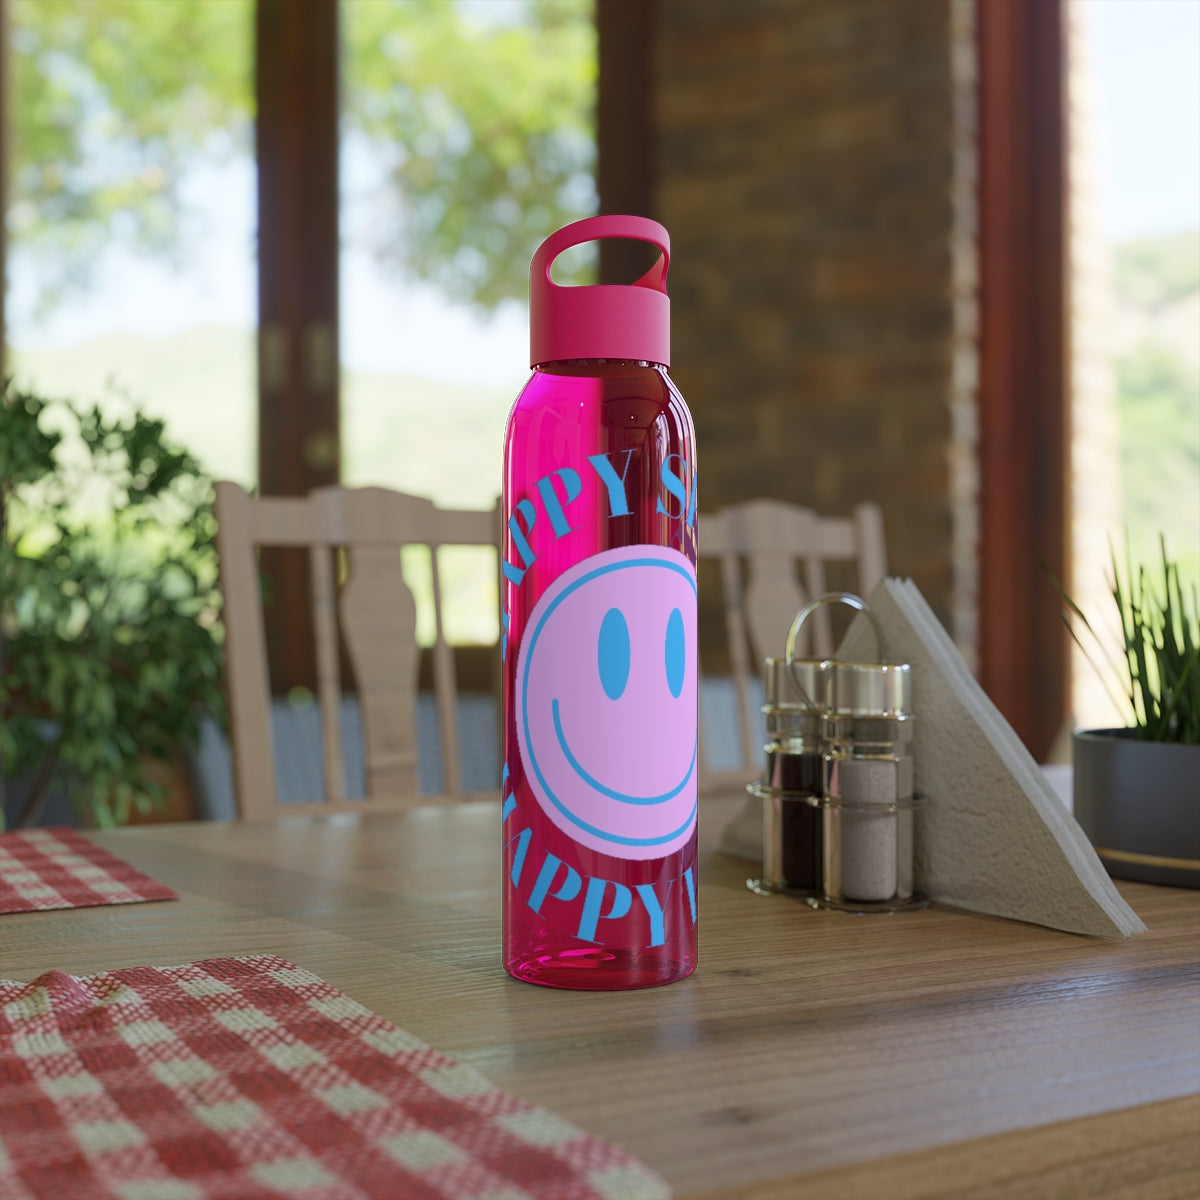 Smiley Face Self Care Water Bottle